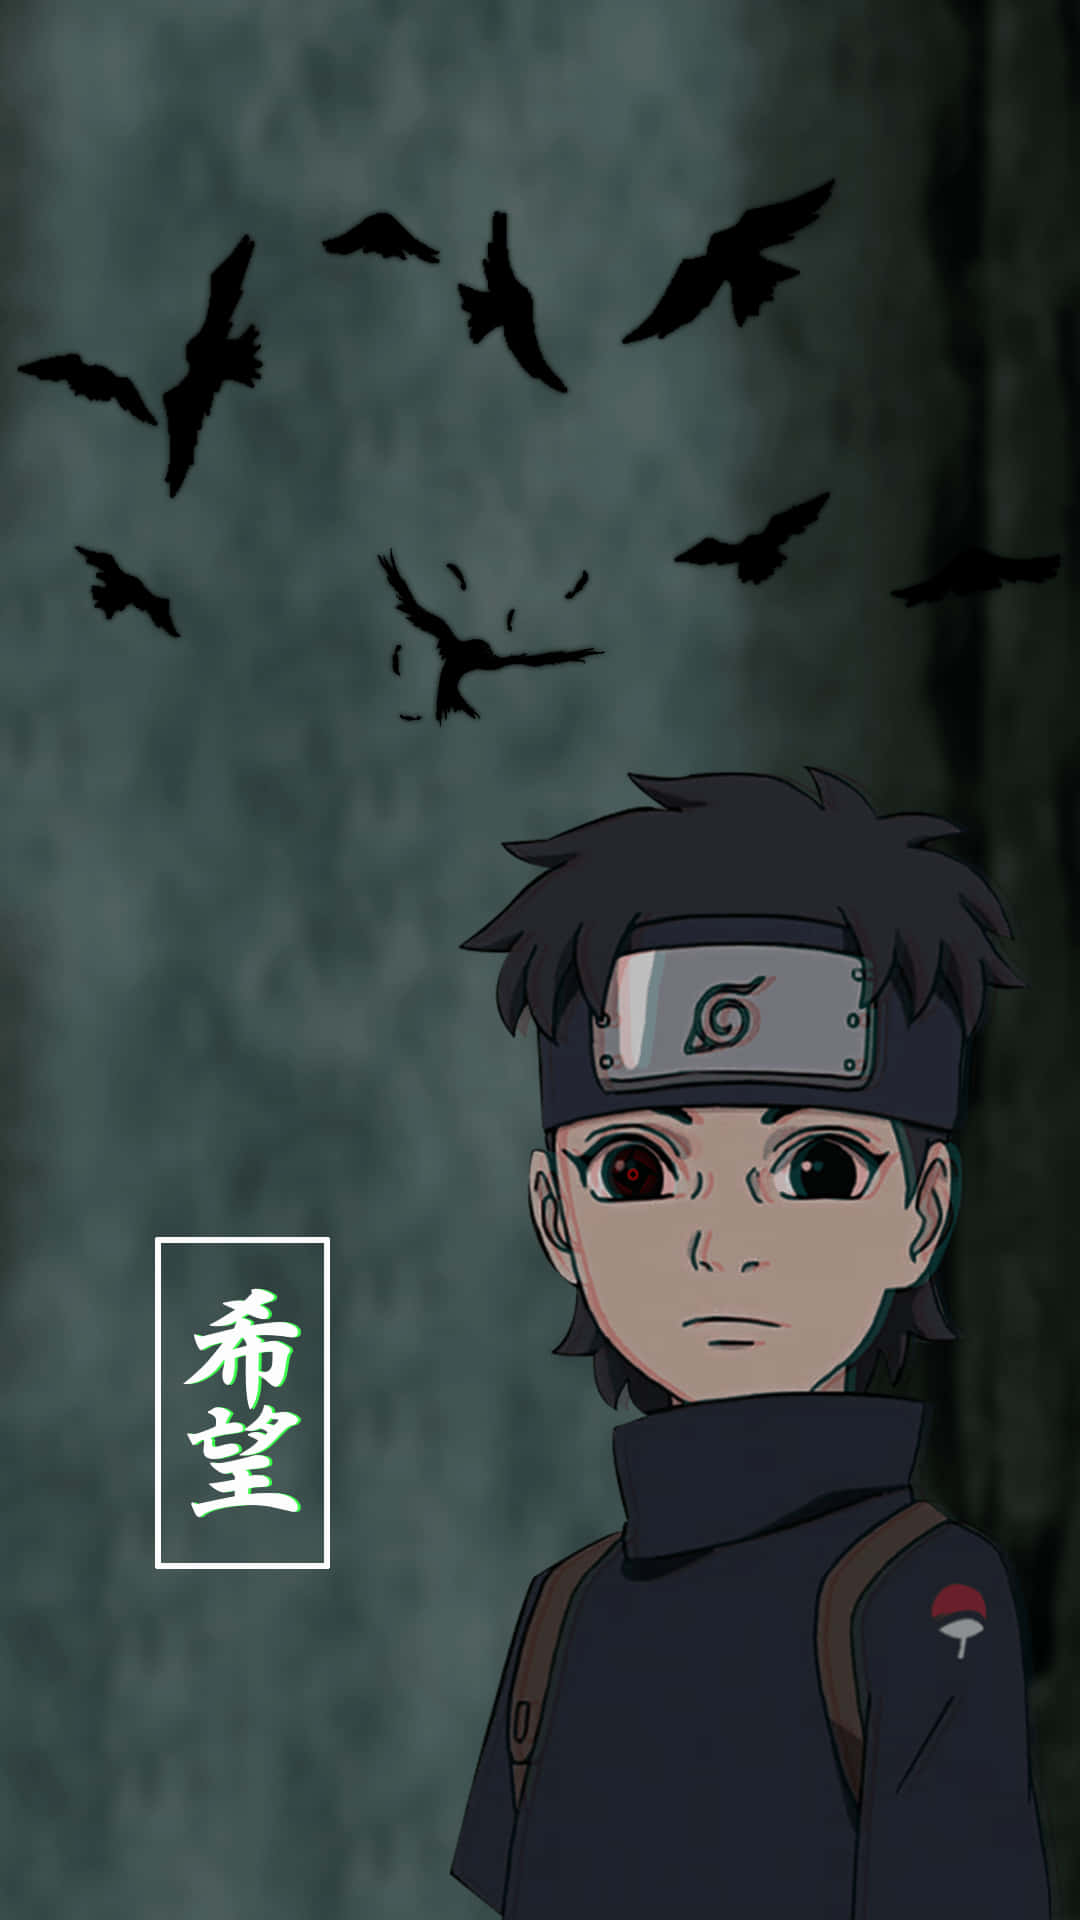 Young Itachi Aesthetic With Black Crows Flying Over Head In Gray Background Wallpaper